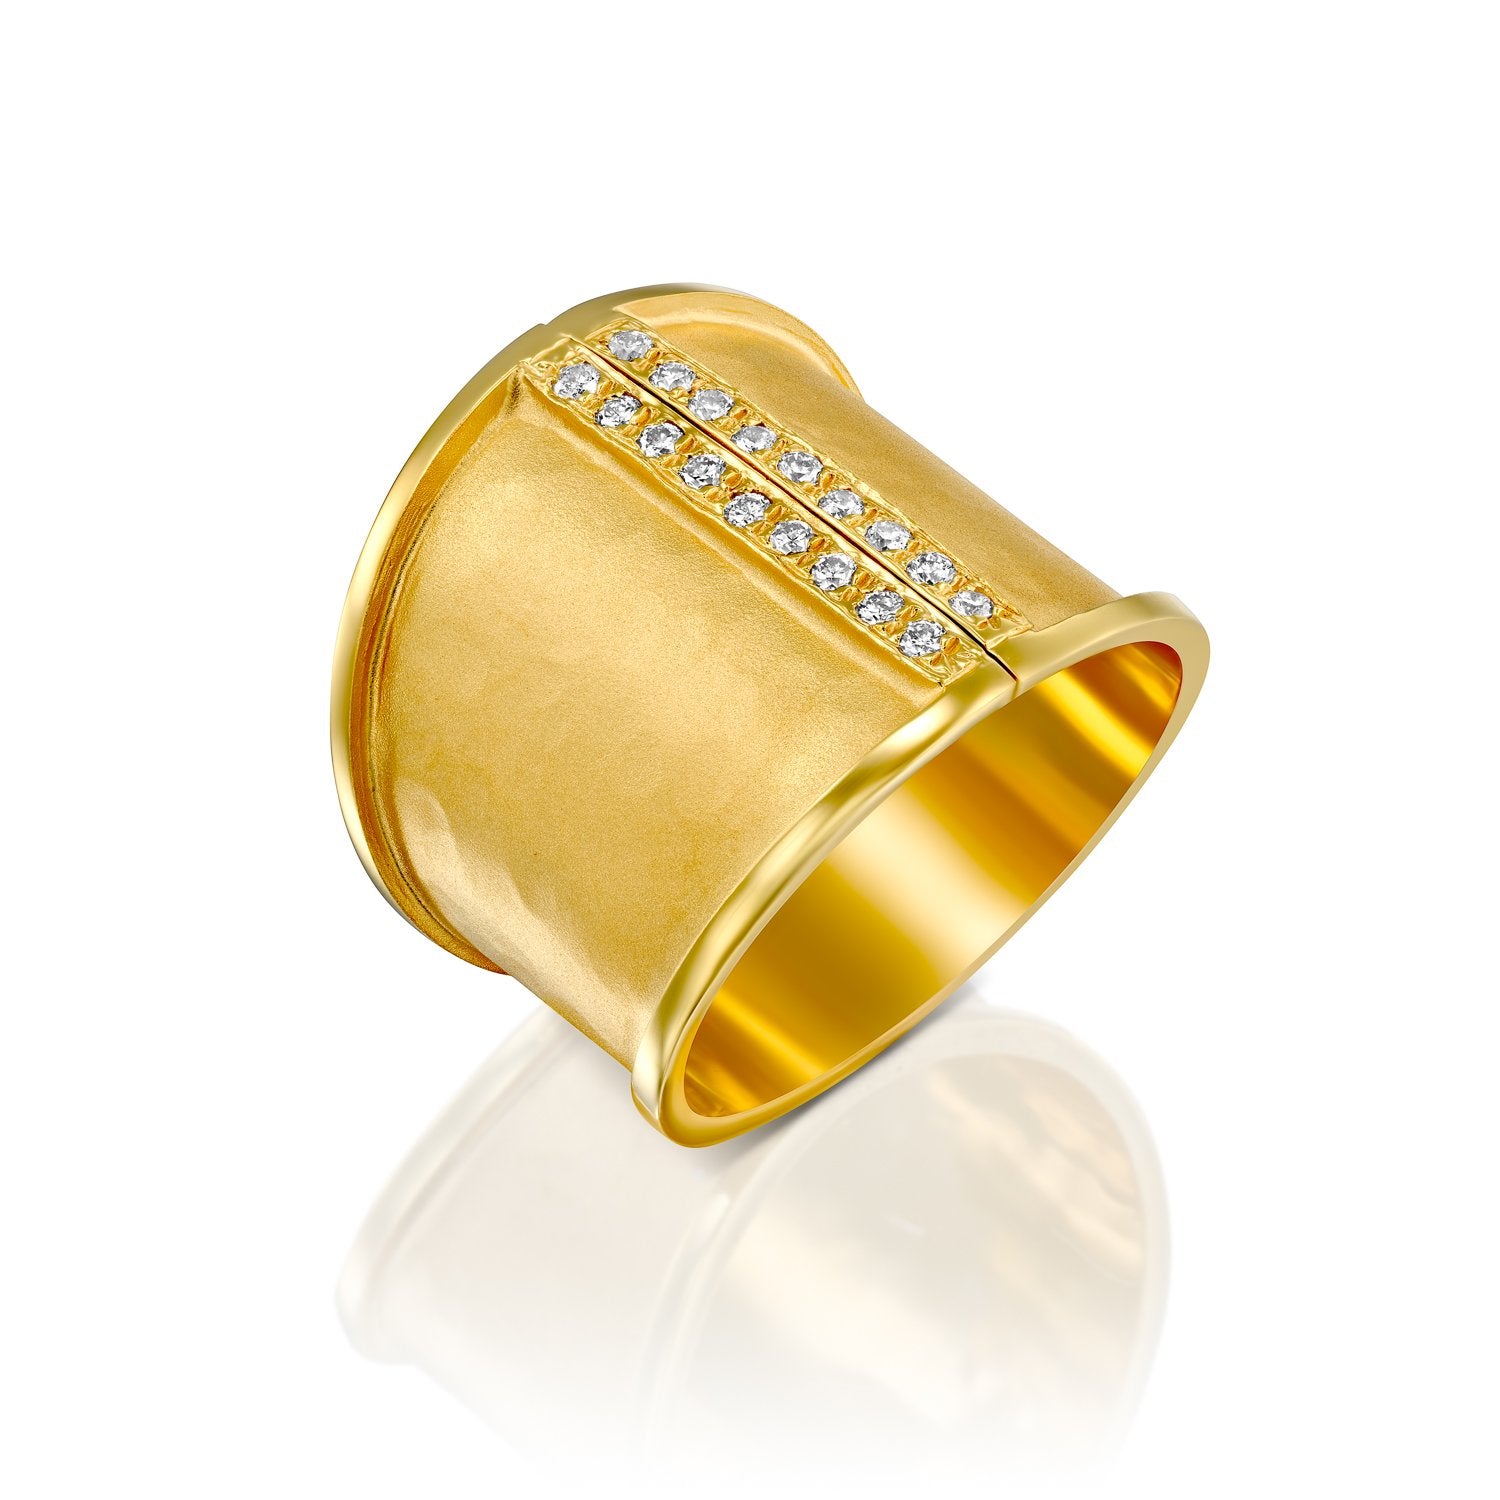 3253 - beautiful 14kt handmade hammered gold ring with shiny edges. double bar white pave diamonds of the highest quality.